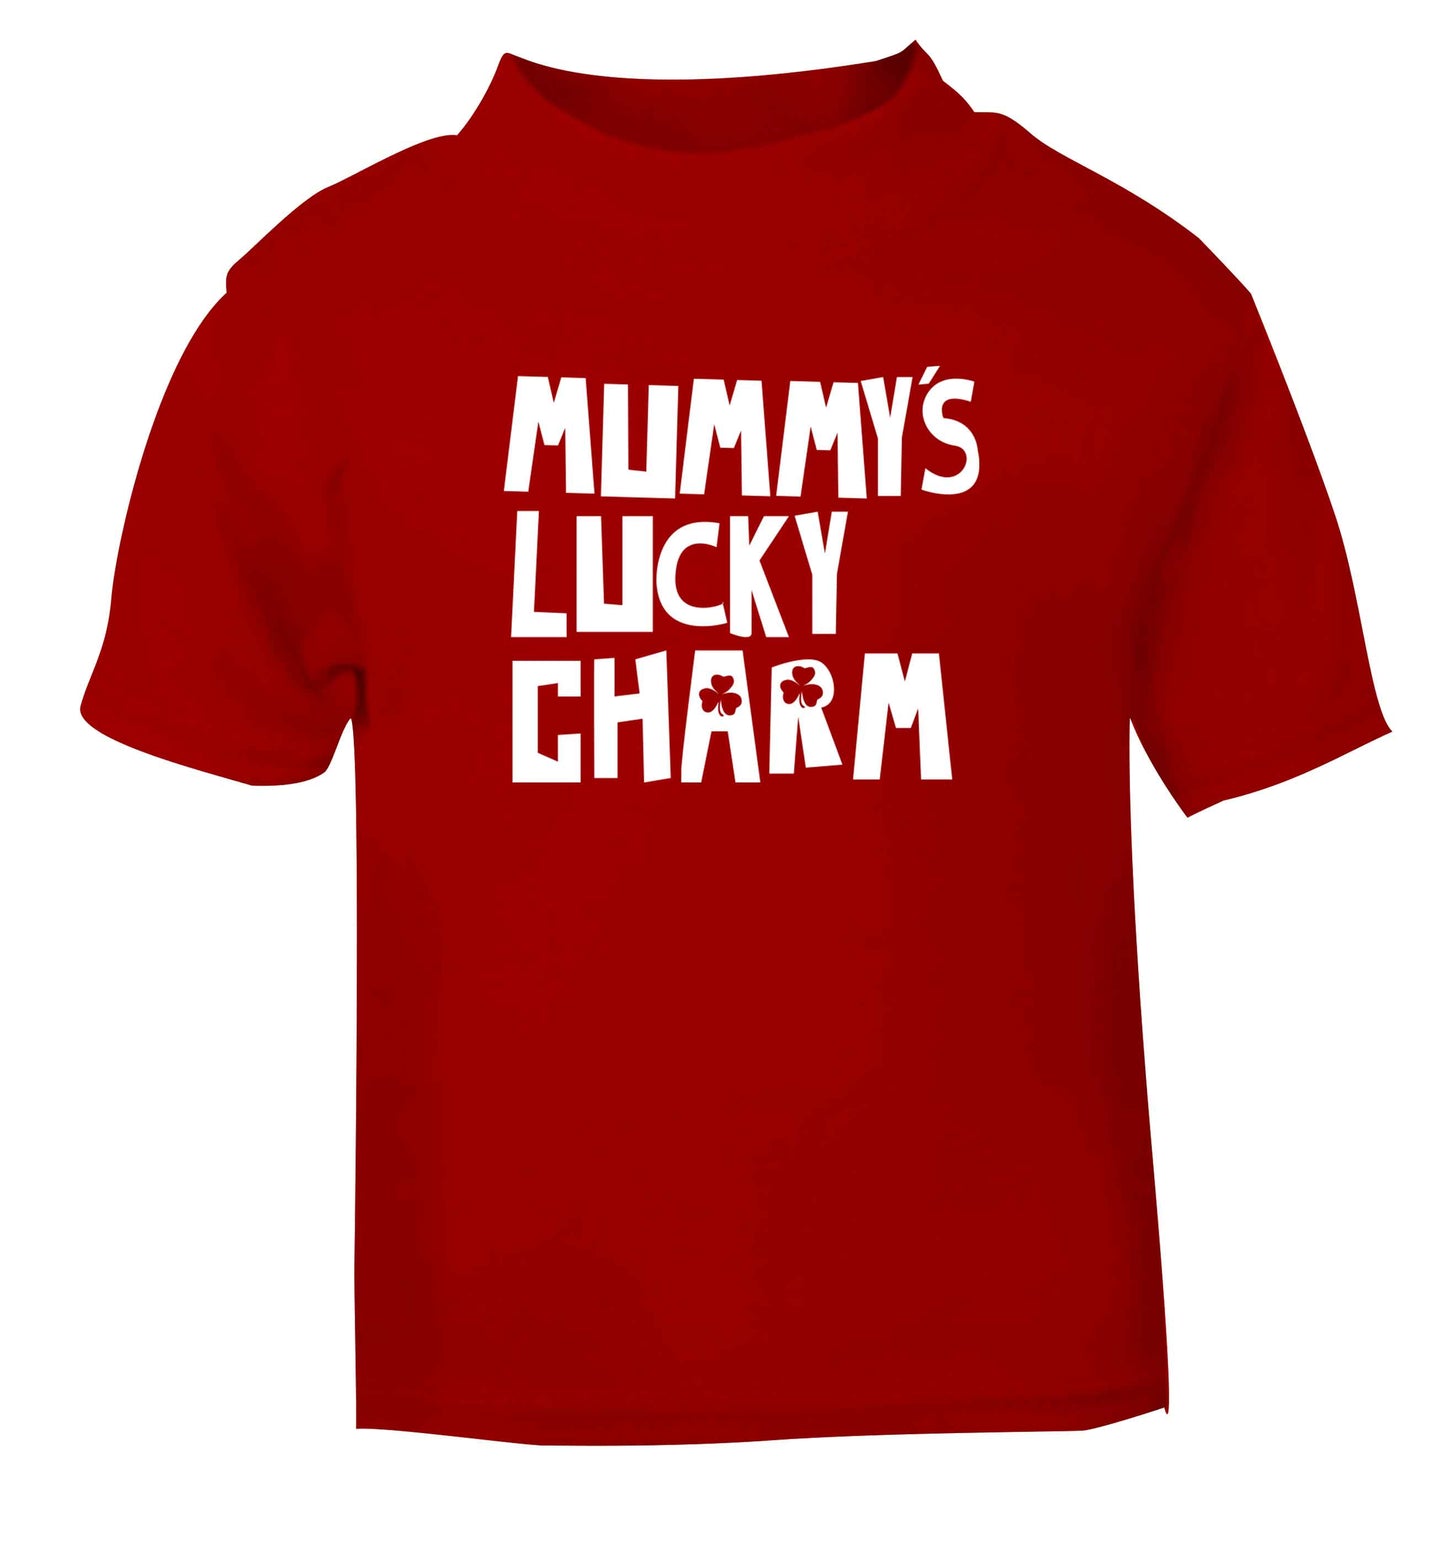 Mummy's lucky charm red baby toddler Tshirt 2 Years